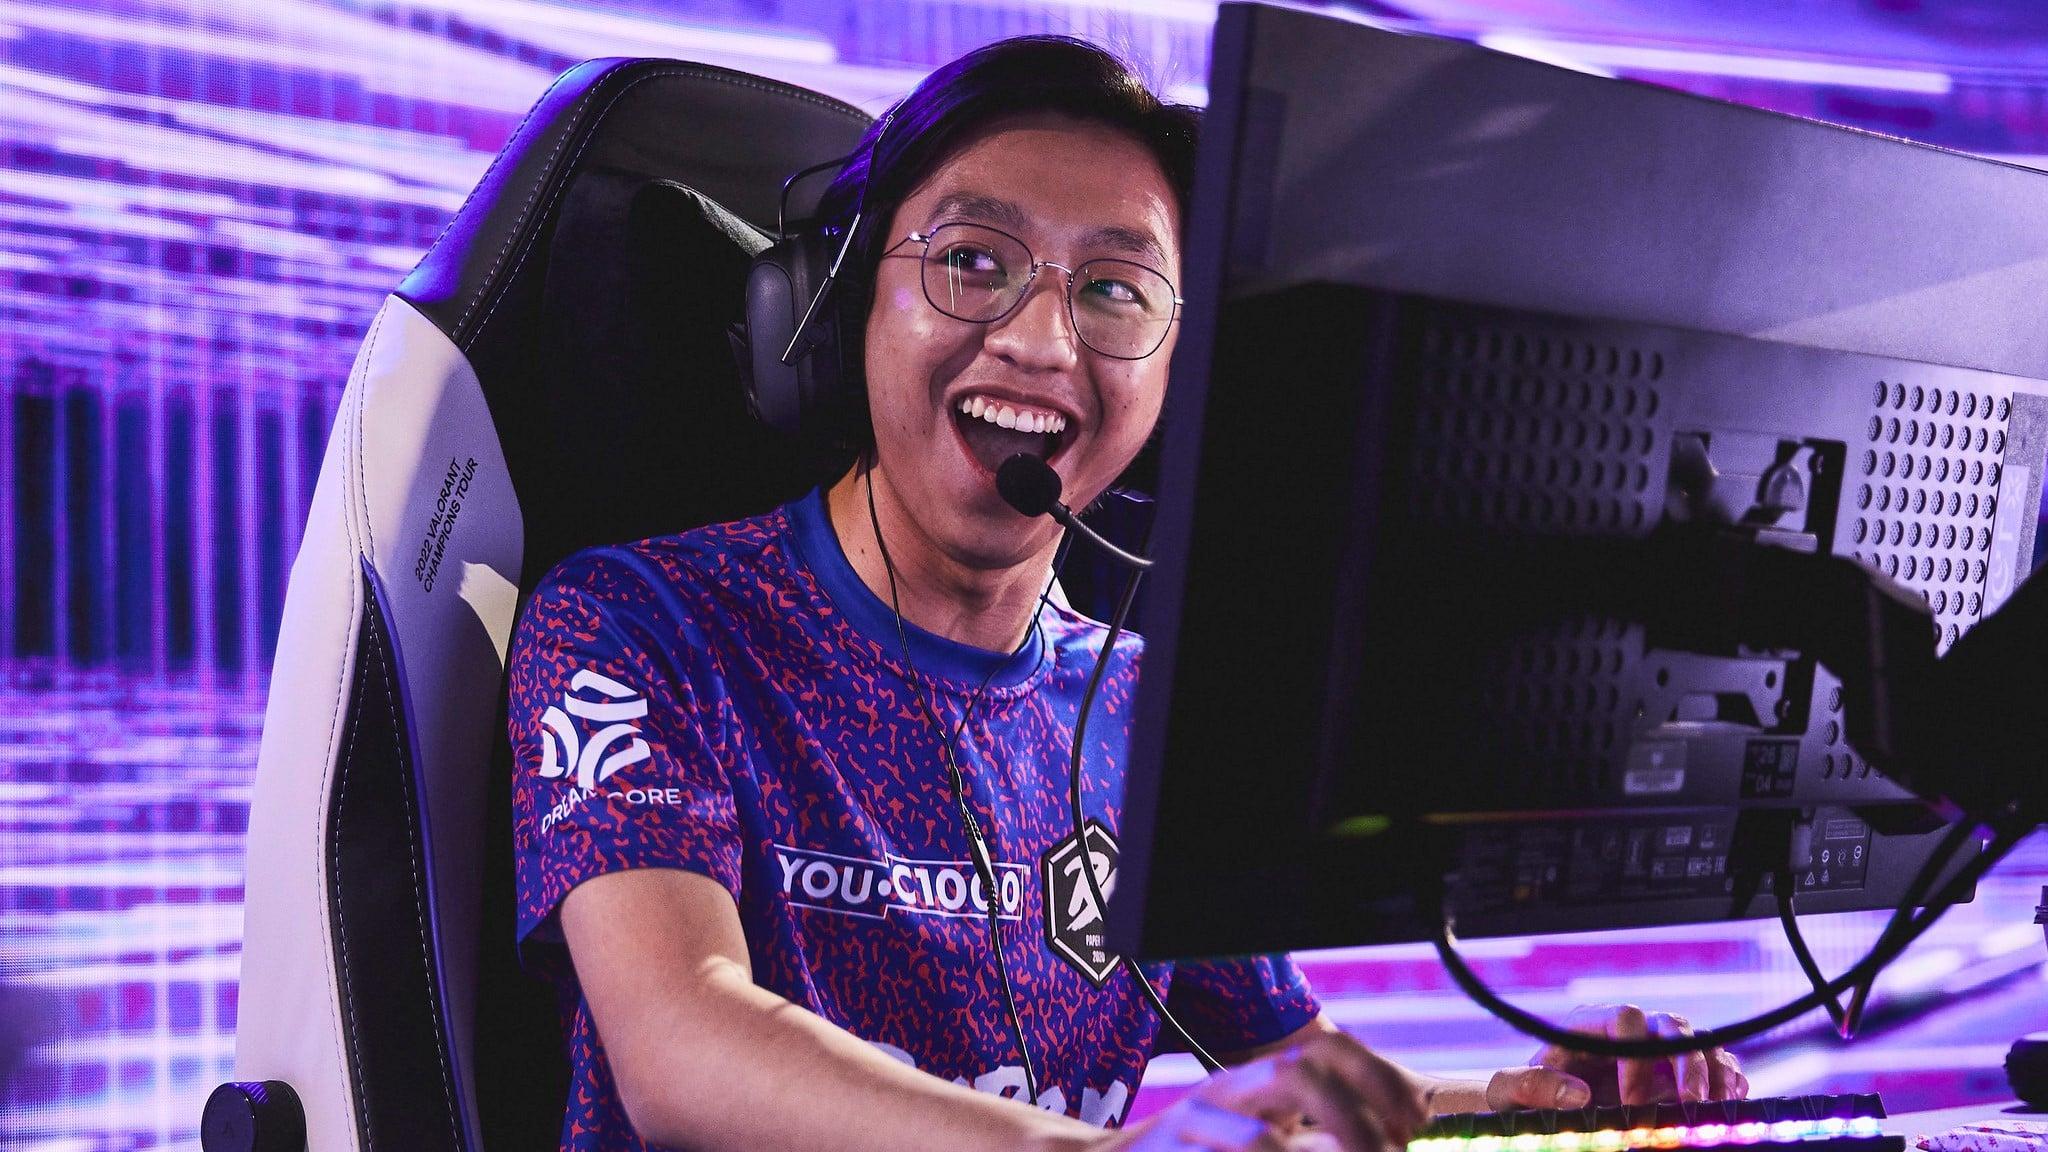 f0rsakeN smiles as he competes on stage